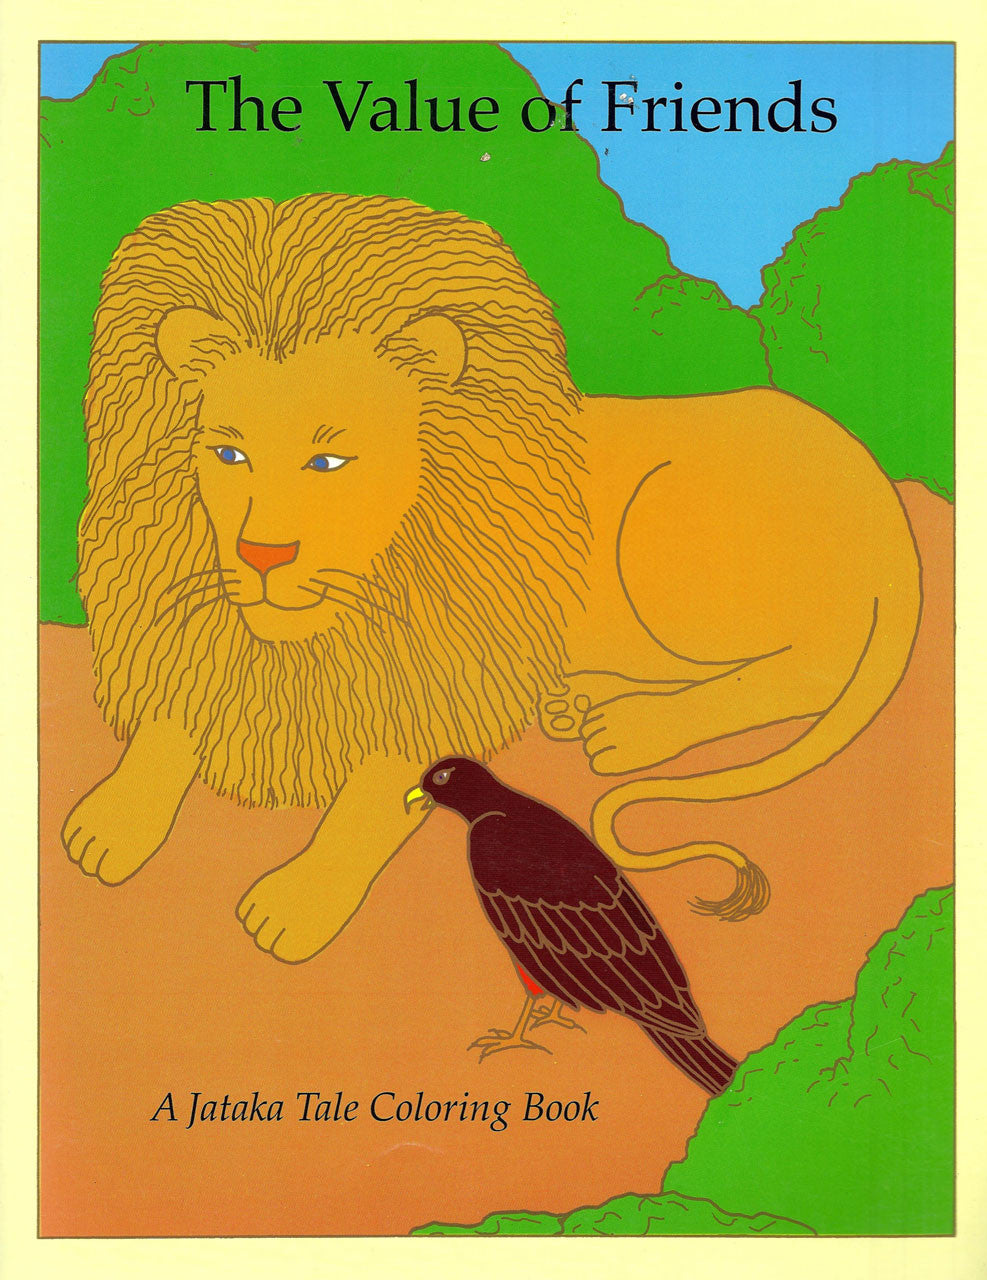 The Value of Friends / The Best of Friends: A Jataka Tale Coloring Book, illustrated by Eric Meller, Rosalyn White